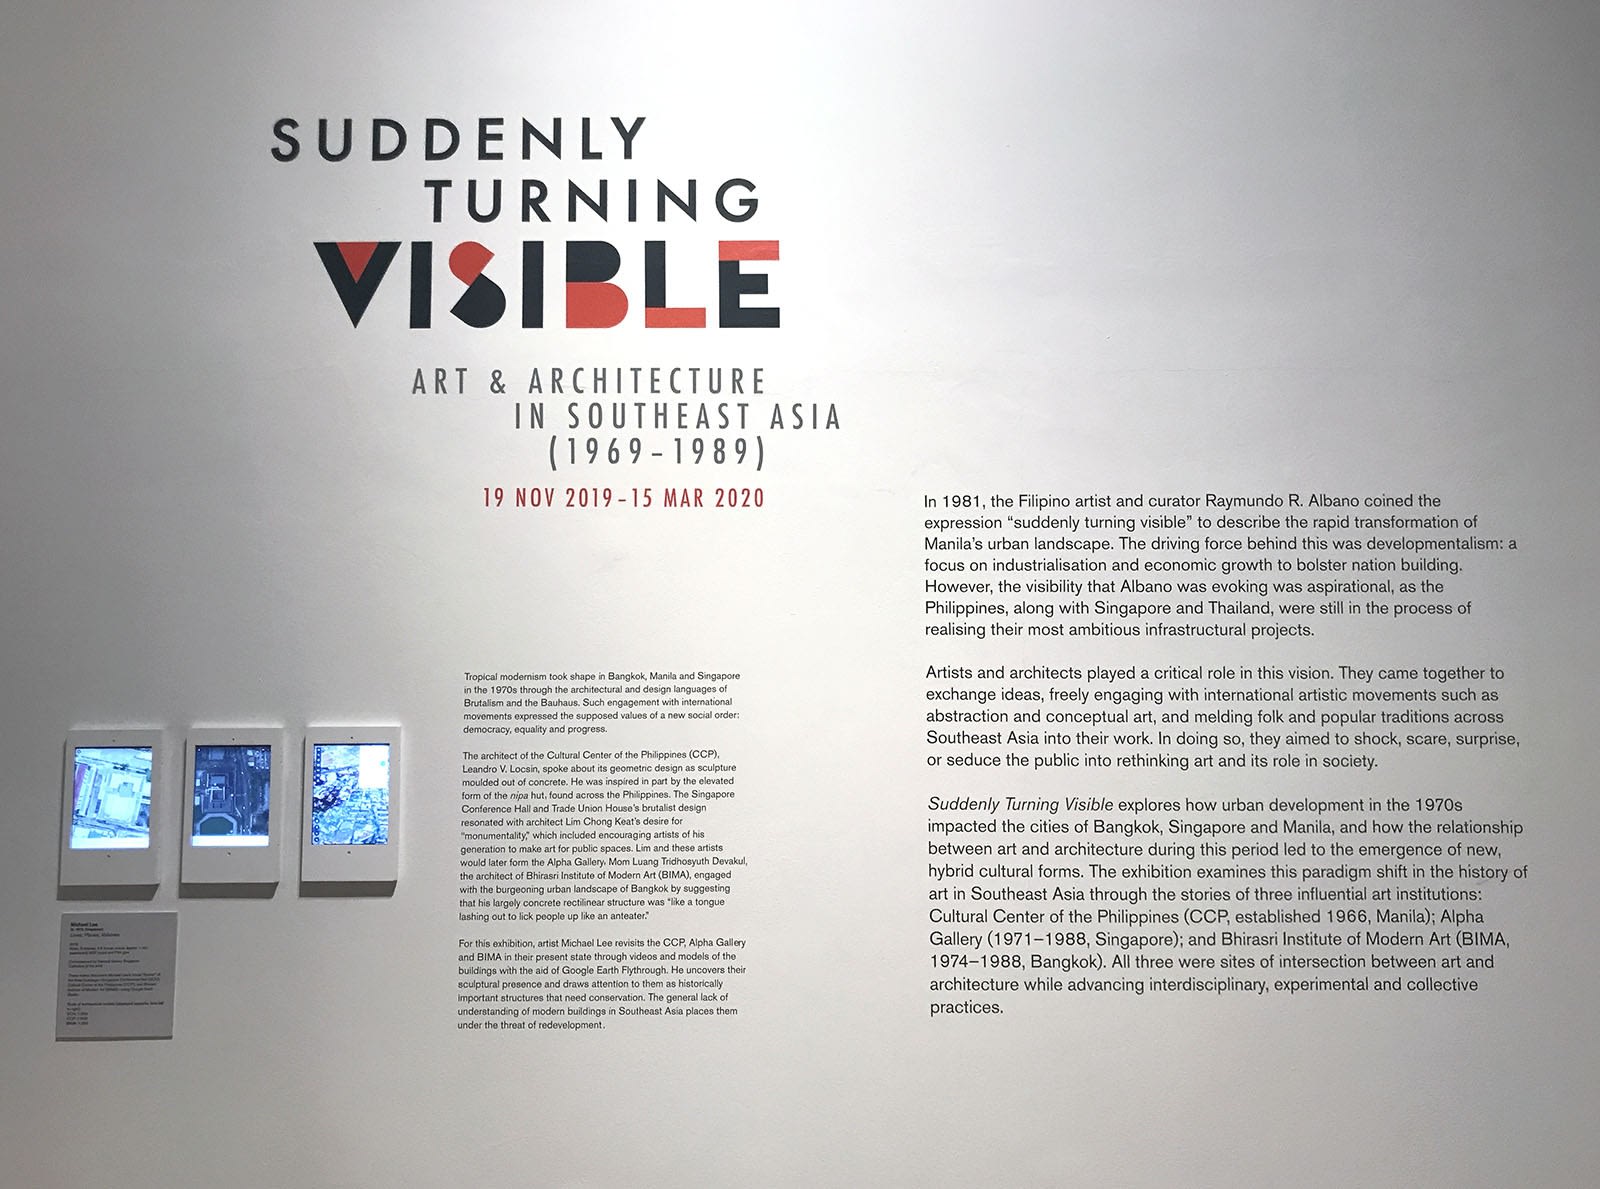 Suddenly Turning Visible: Art and Architecture in SEA, 1969-89